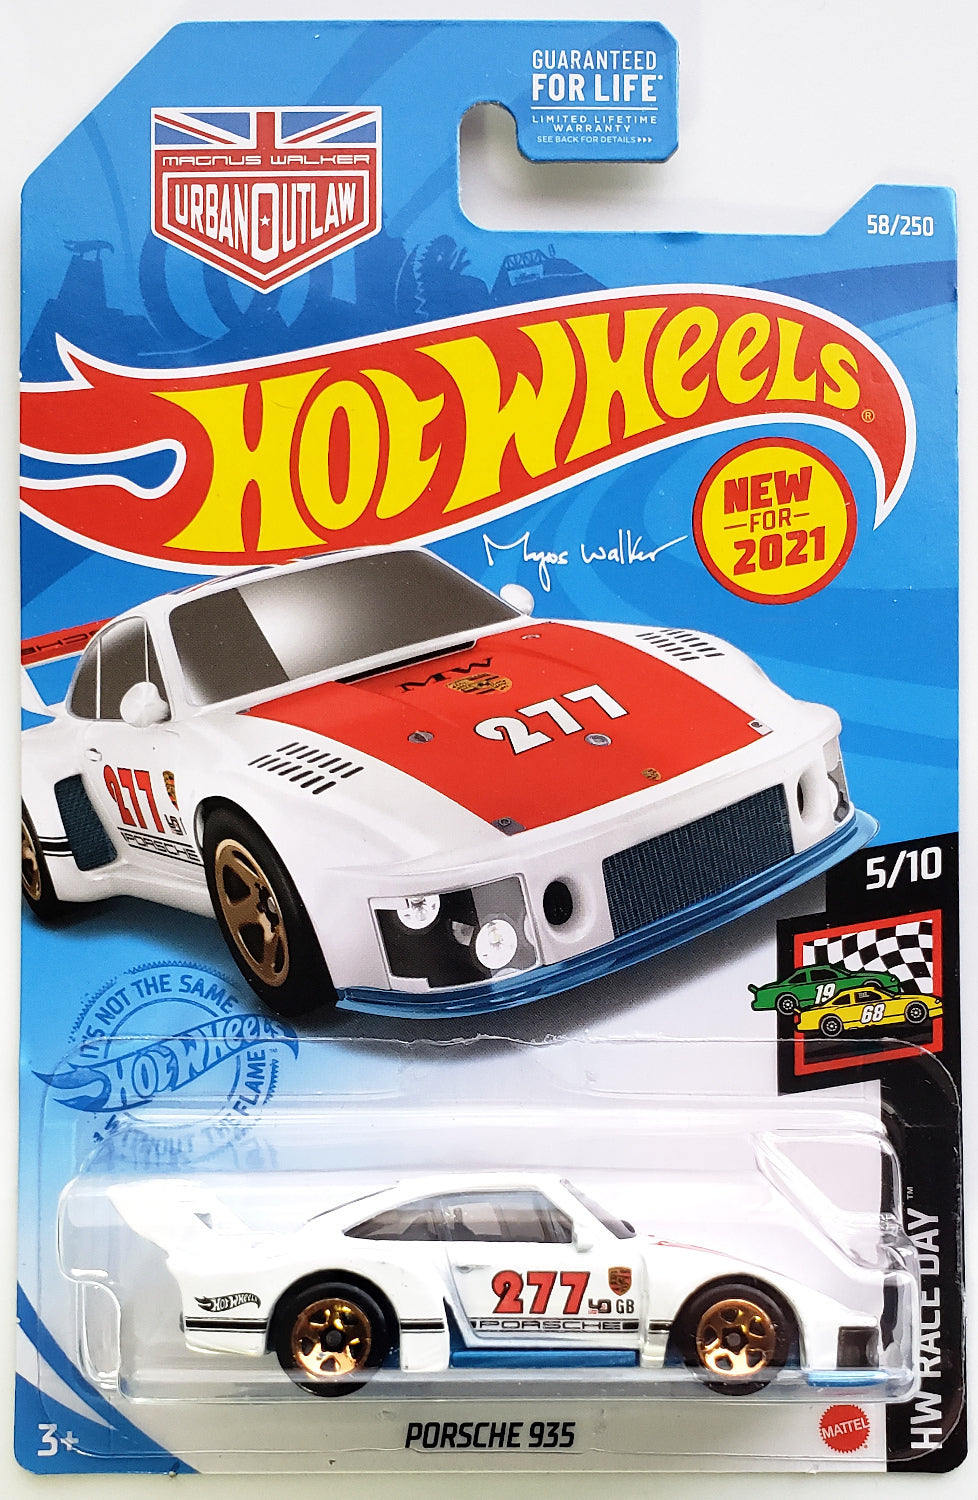 Hot Wheels 2021 - Collector # 058/250 - HW Race Day 5/10 - New Models - Porsche 935 - White / Urban Outlaw / Red Hood & Blue Base - USA Card